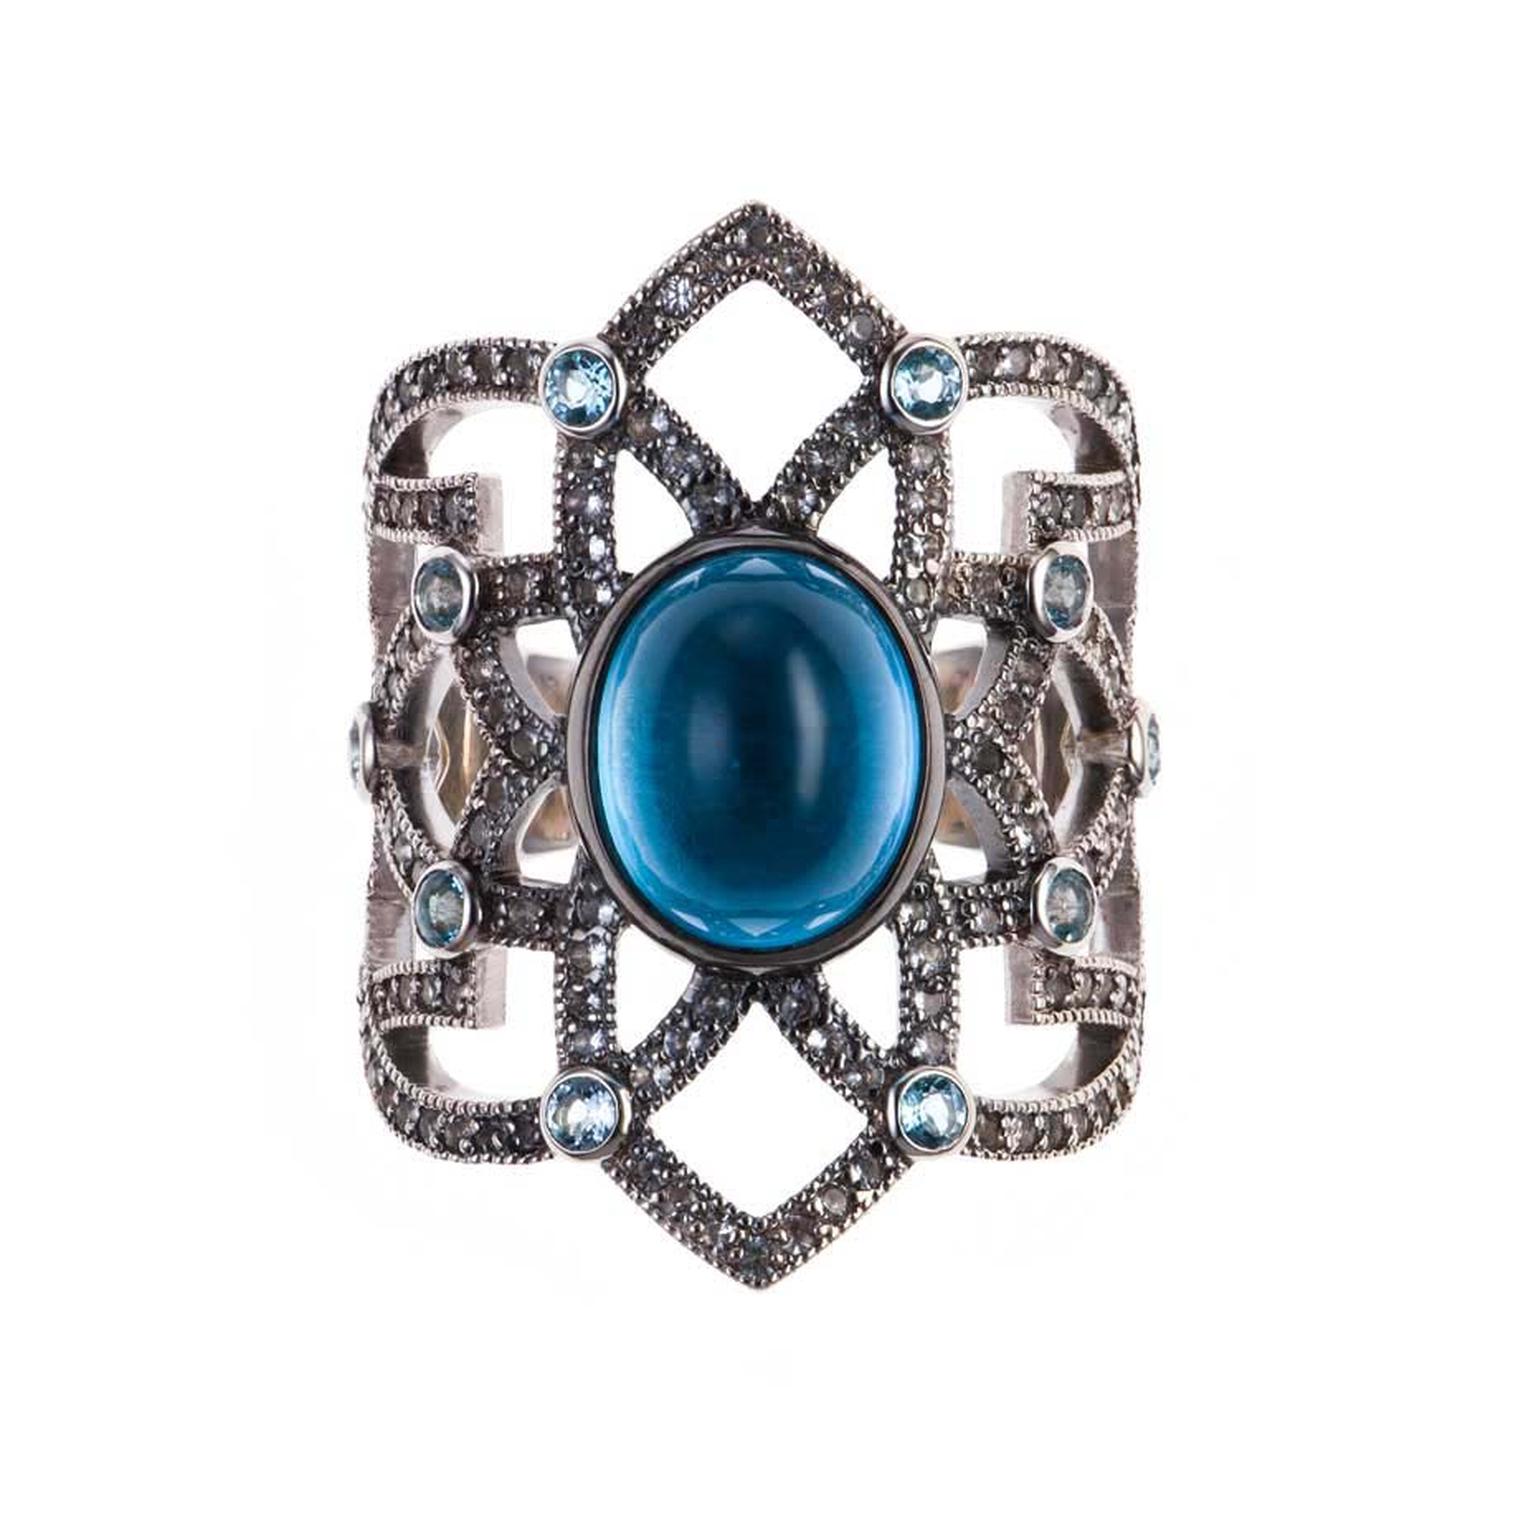 Petr Axenoff silver Ekaterina 2 ring featuring garnets, sapphires and pearls.